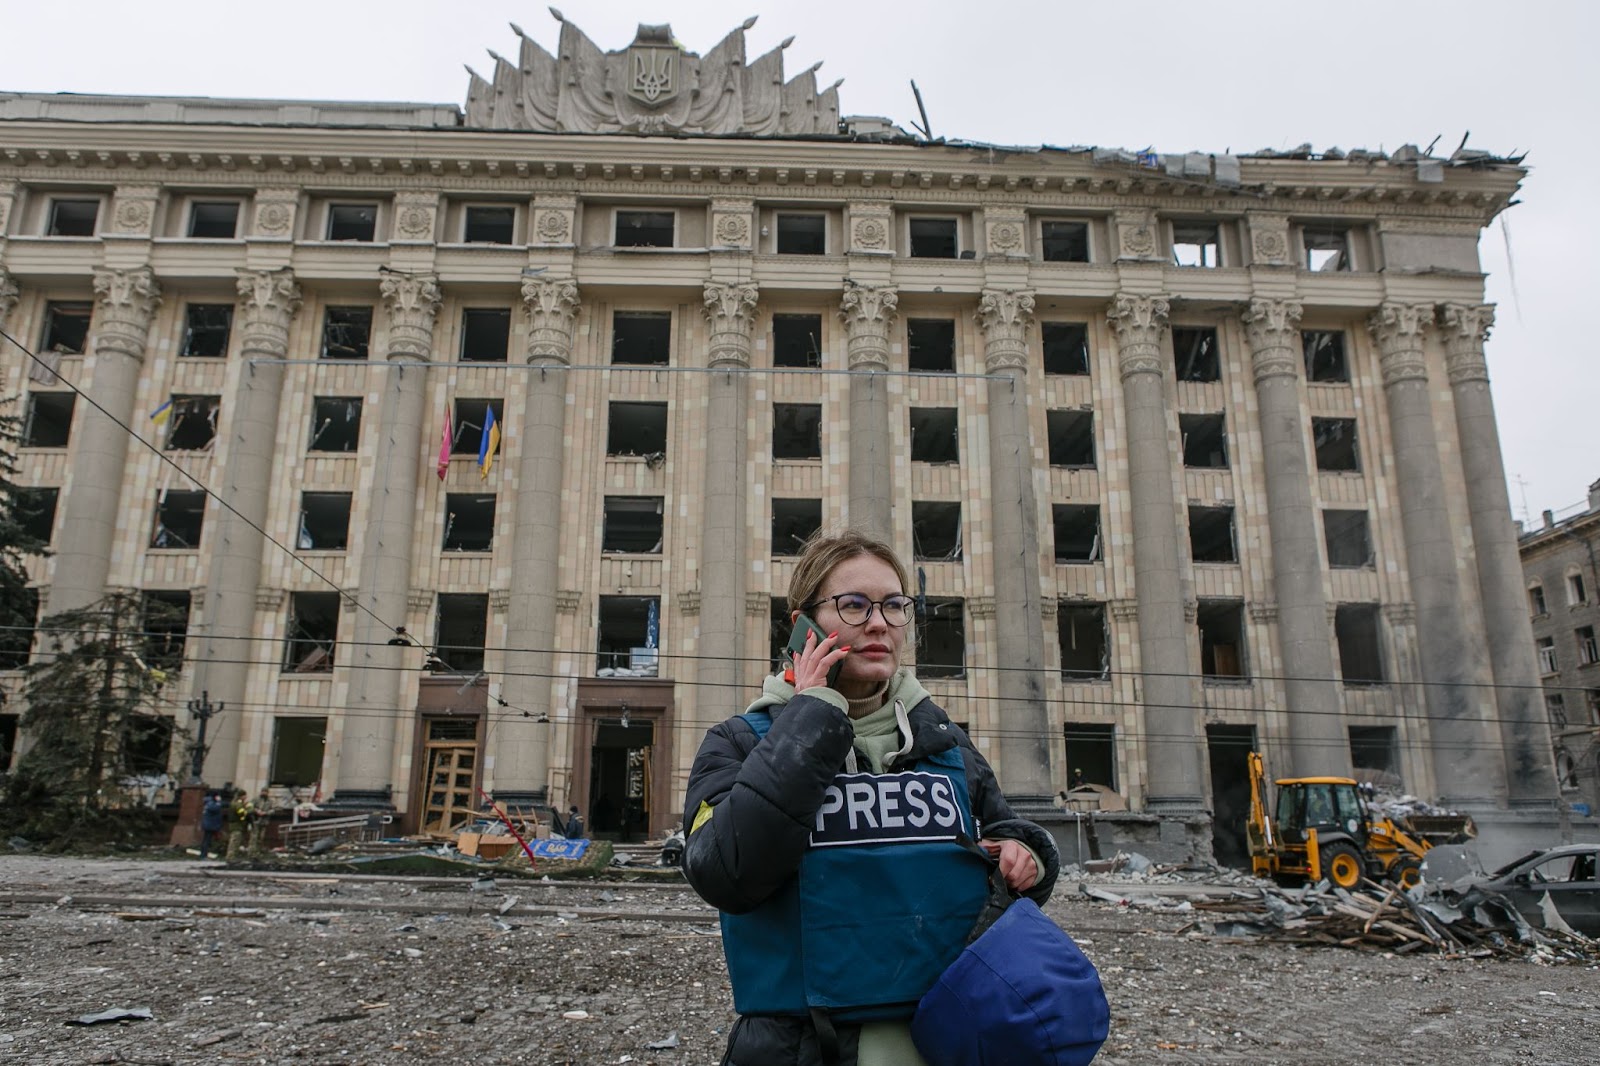 Journalist with bulletproof vest talking on the phone in front of a Ukrainian building struck by Russian attacks.